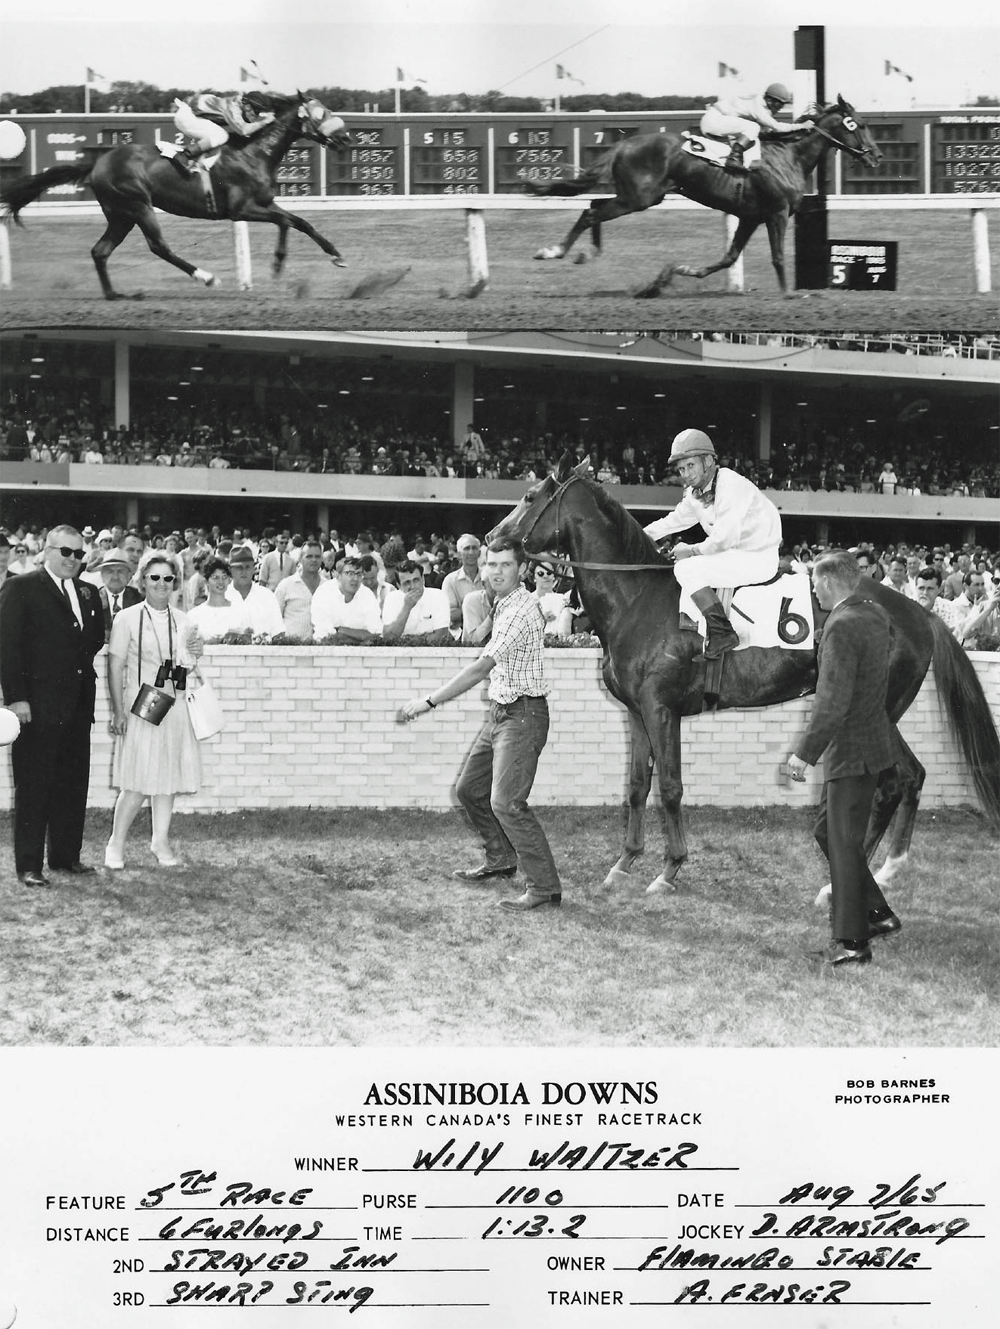 Wily Waltzer wins at ASD for Flaming Stable. August 7, 1965.